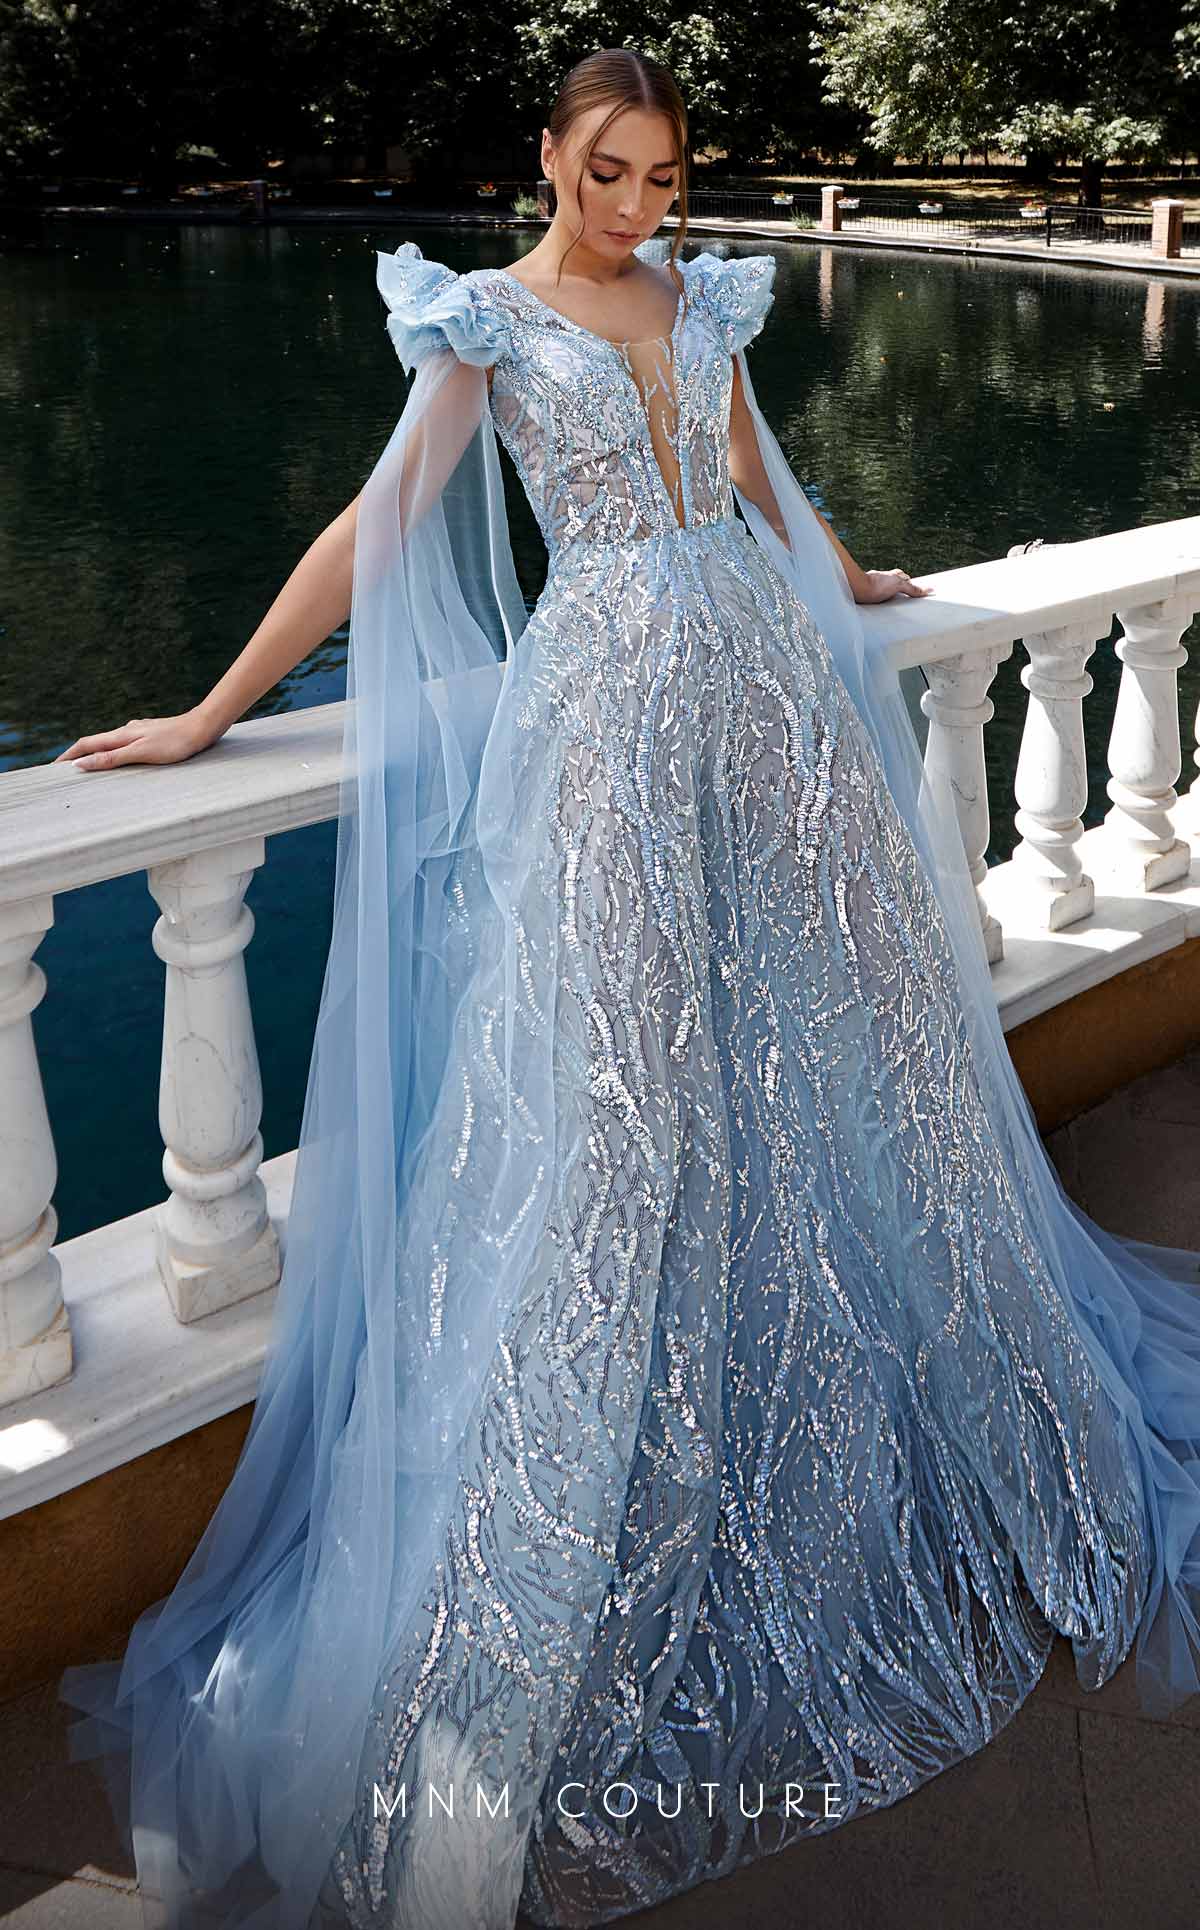 Sky Blue Lace and White Tulle Long Train Formal Gown - VQ